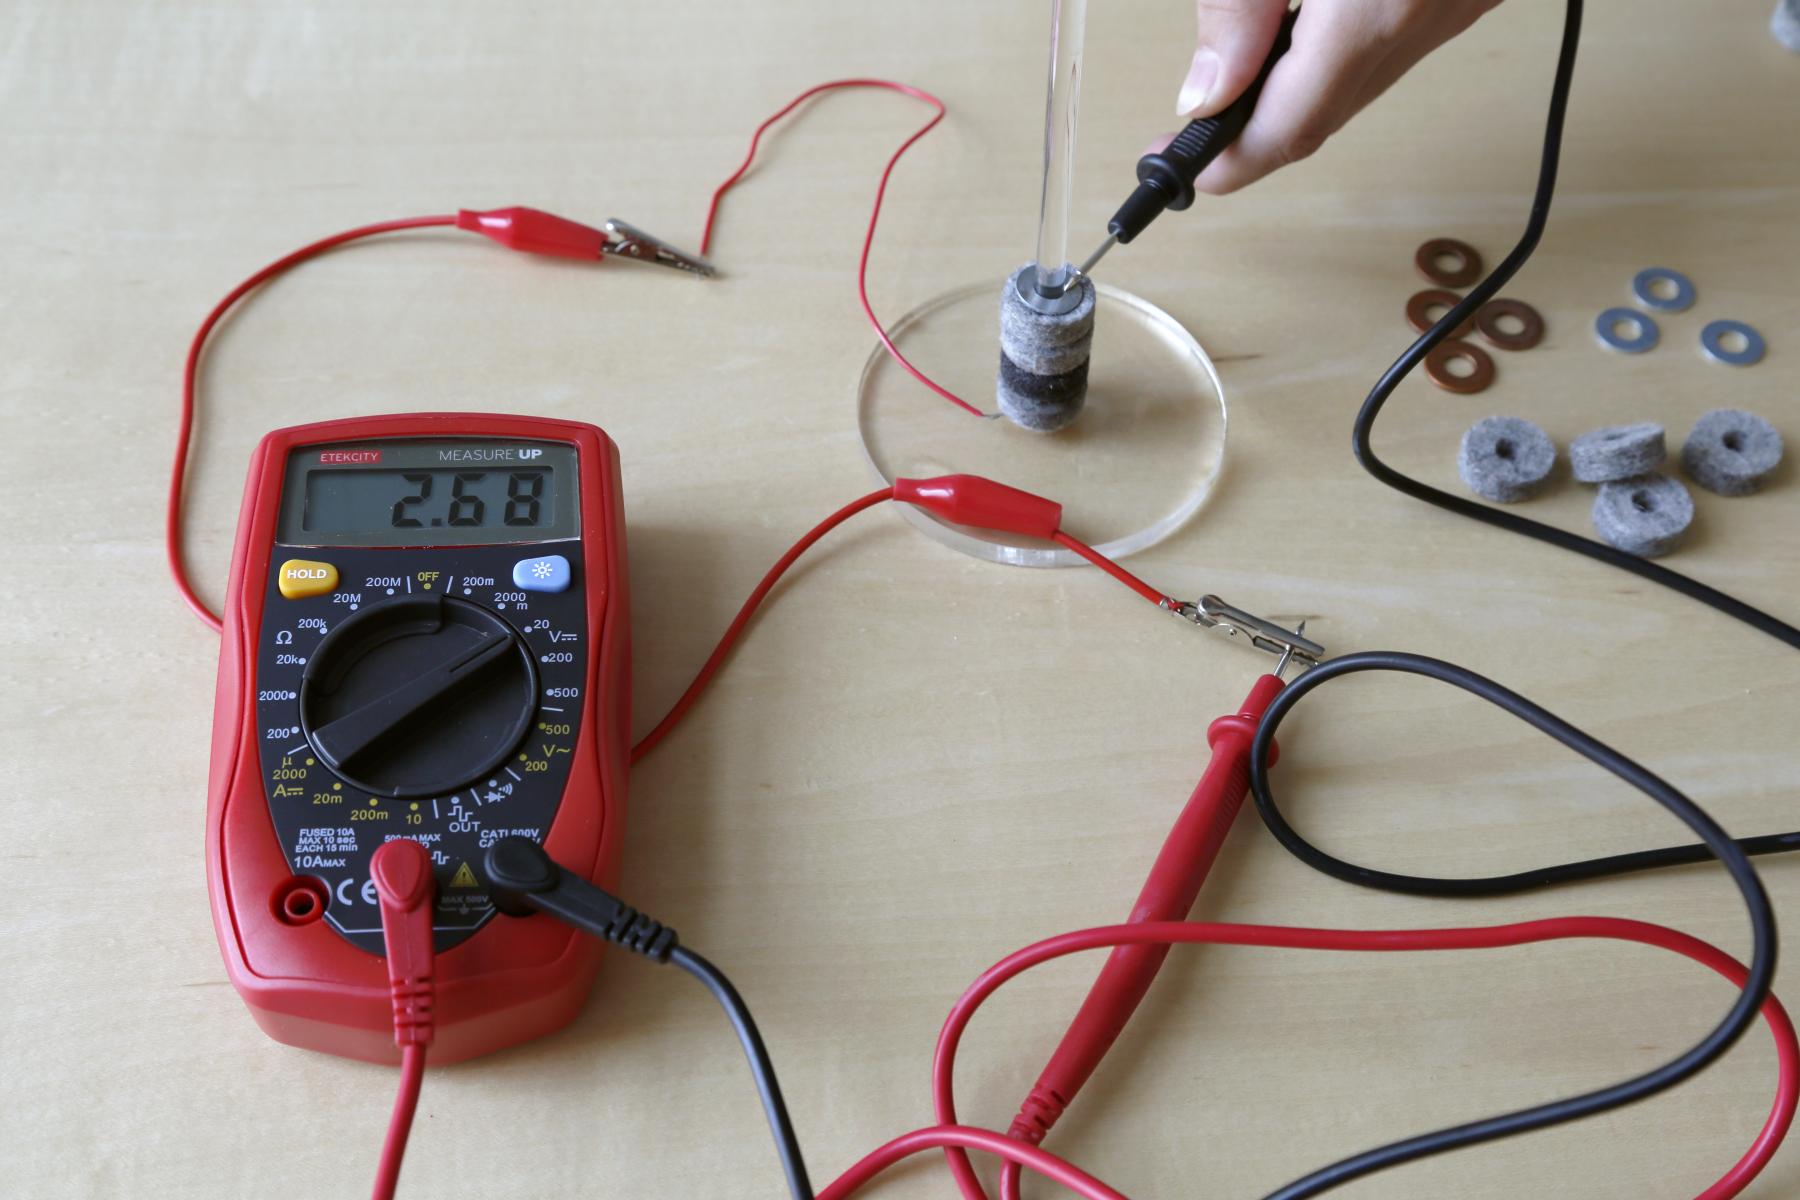 voltaic pile connected to multimeter on table with washers